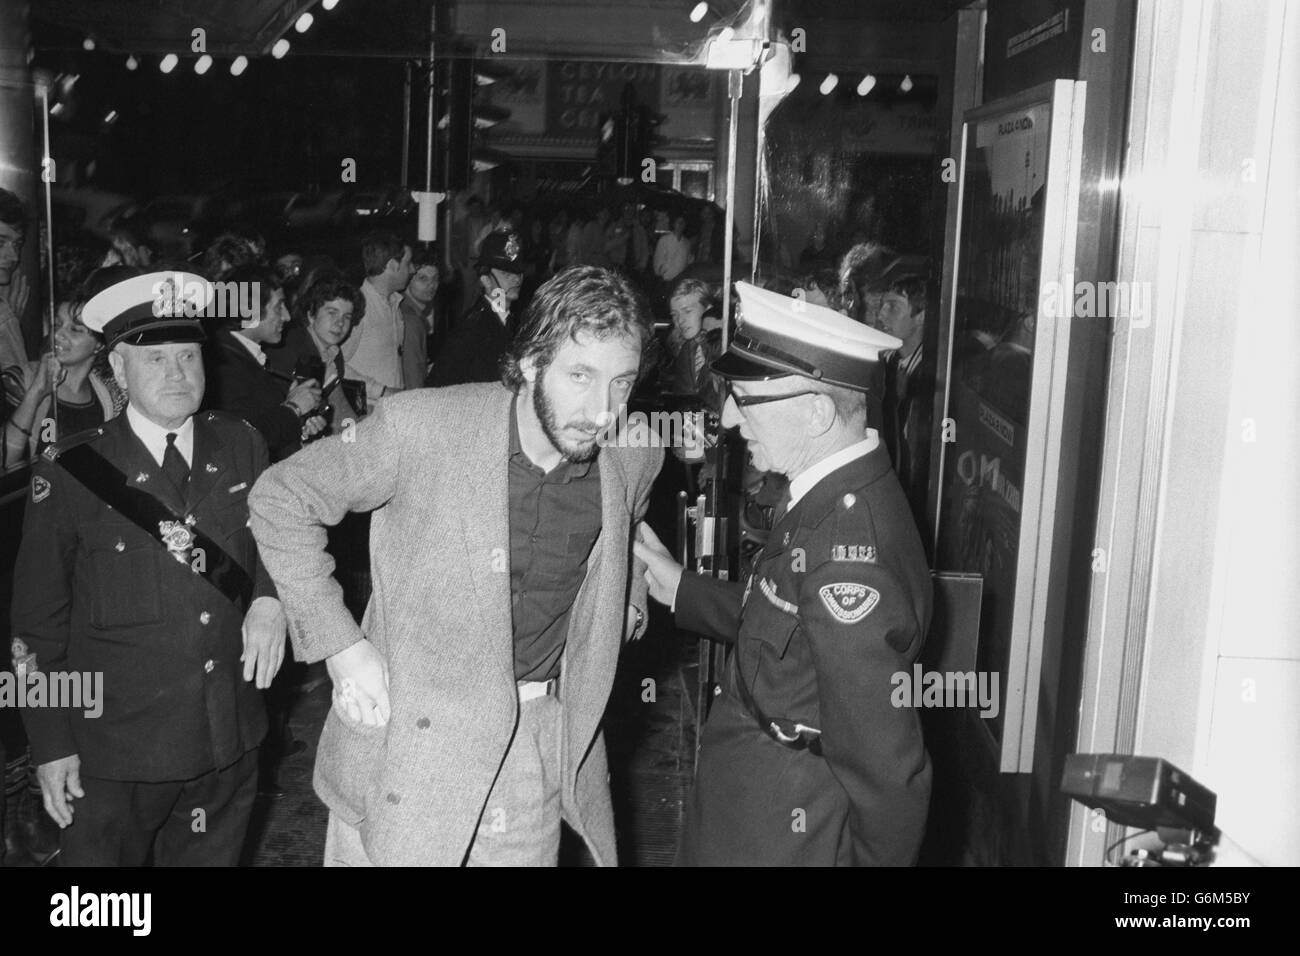 Rock star Pete Townshend, of The Who, halted by a commissionaire wanting to see his ticket as he arrived at the Plaza One Cinema in Lower Regent Street, London, to attend the world premiere of Quadrophenia, a film based on The Who's album of the same name. Townshend silently produced his ticket and went in to join the star-studded audience. Stock Photo